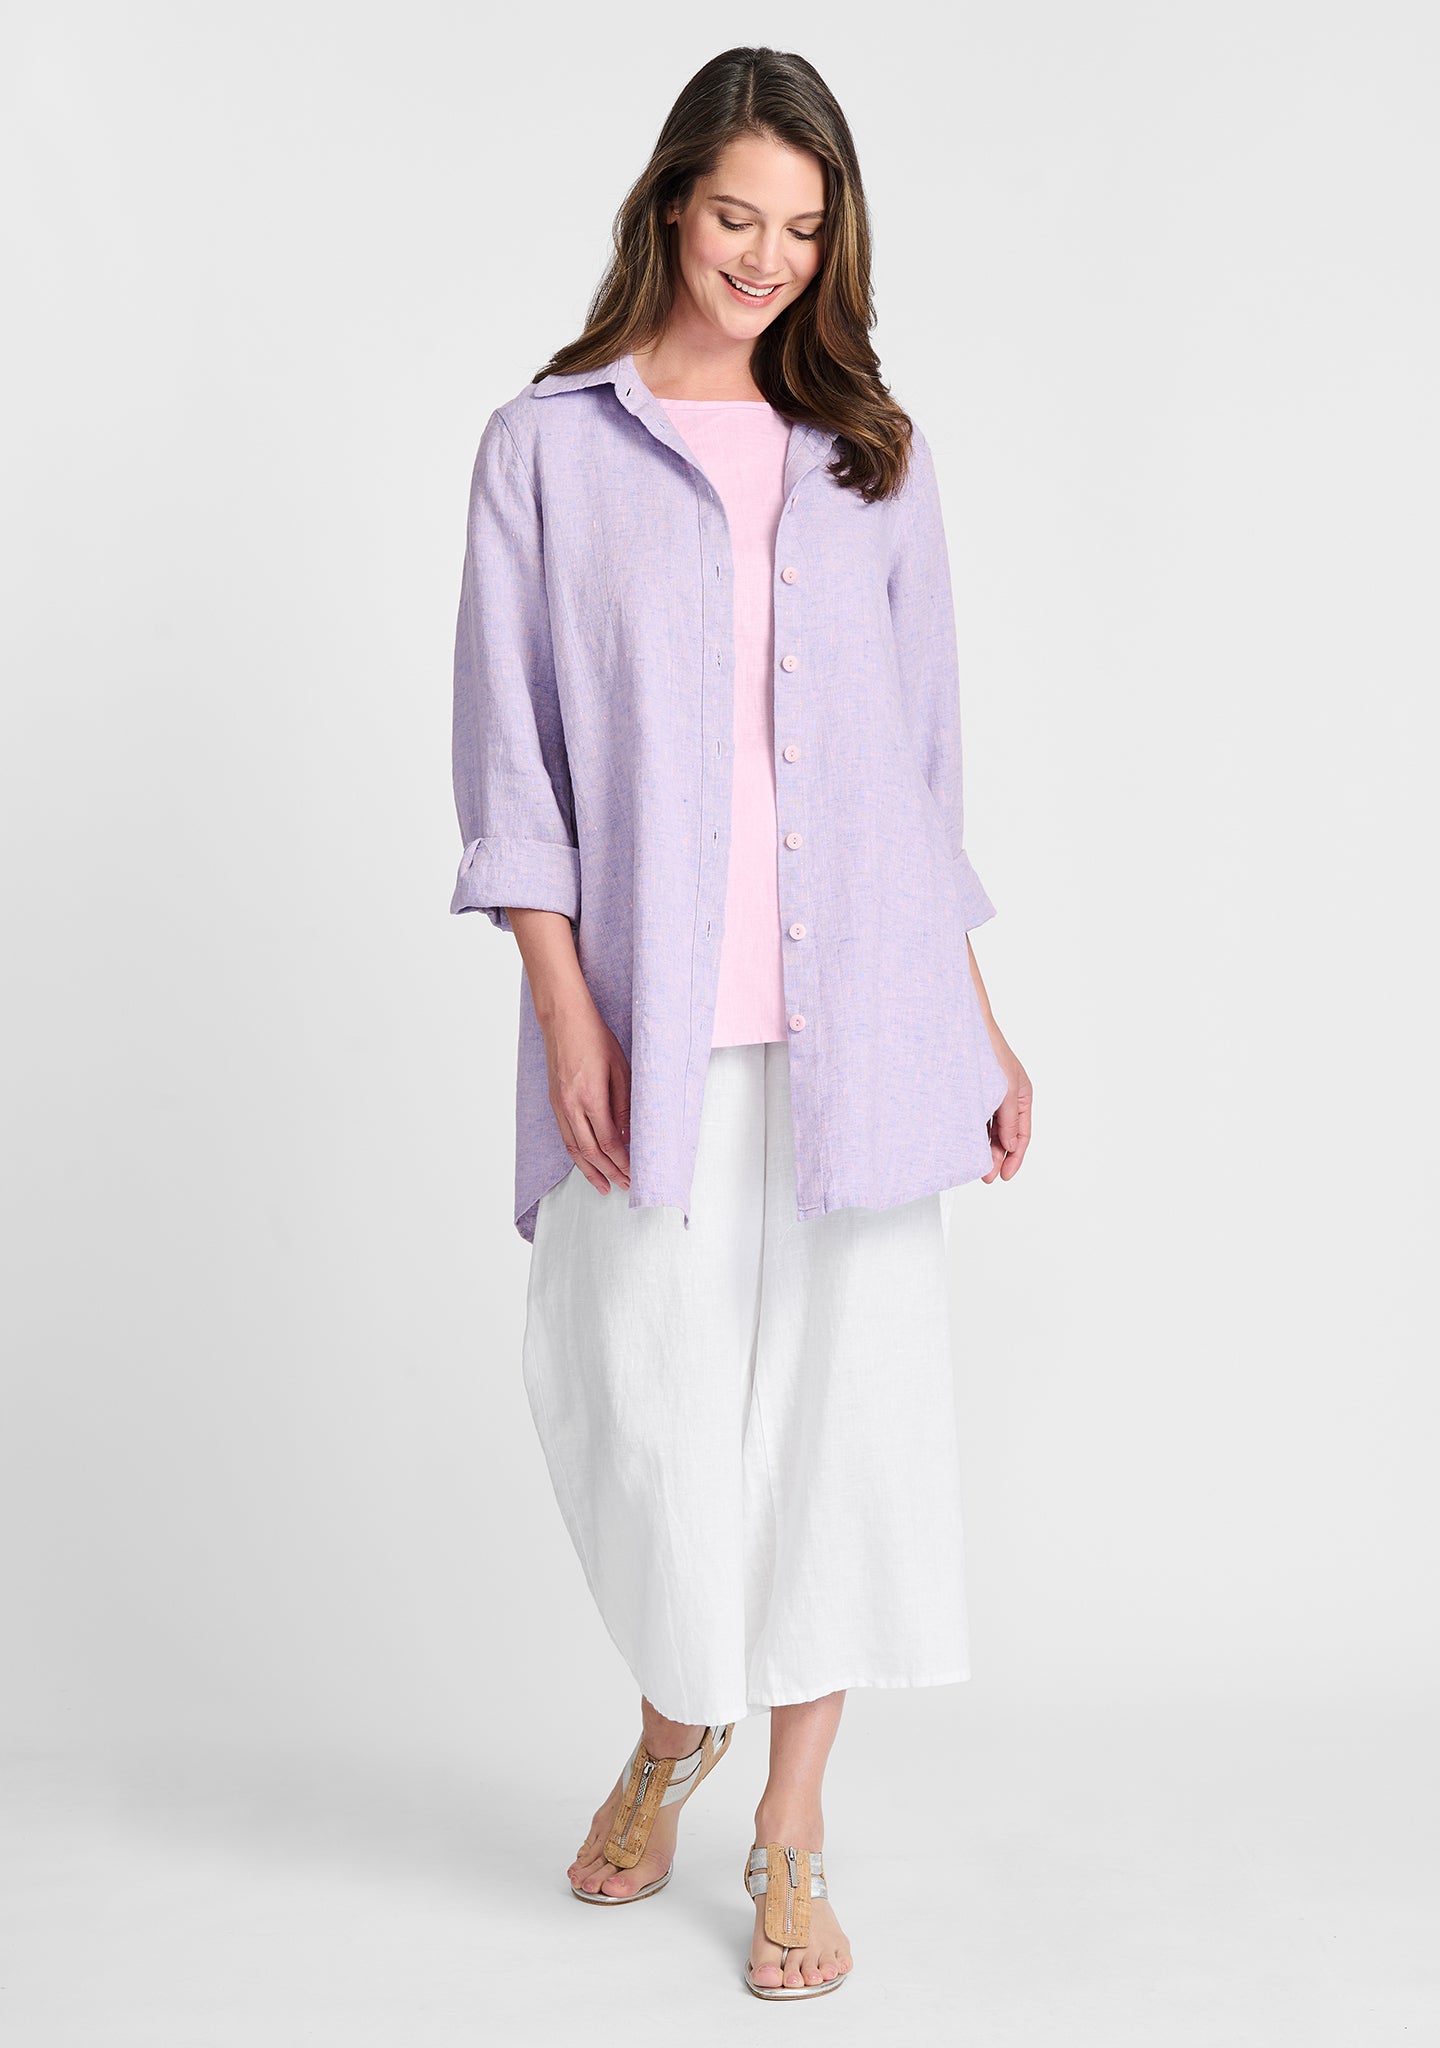 FLAX linen shirt in purple with linen tank in pink and linen pants in purpel